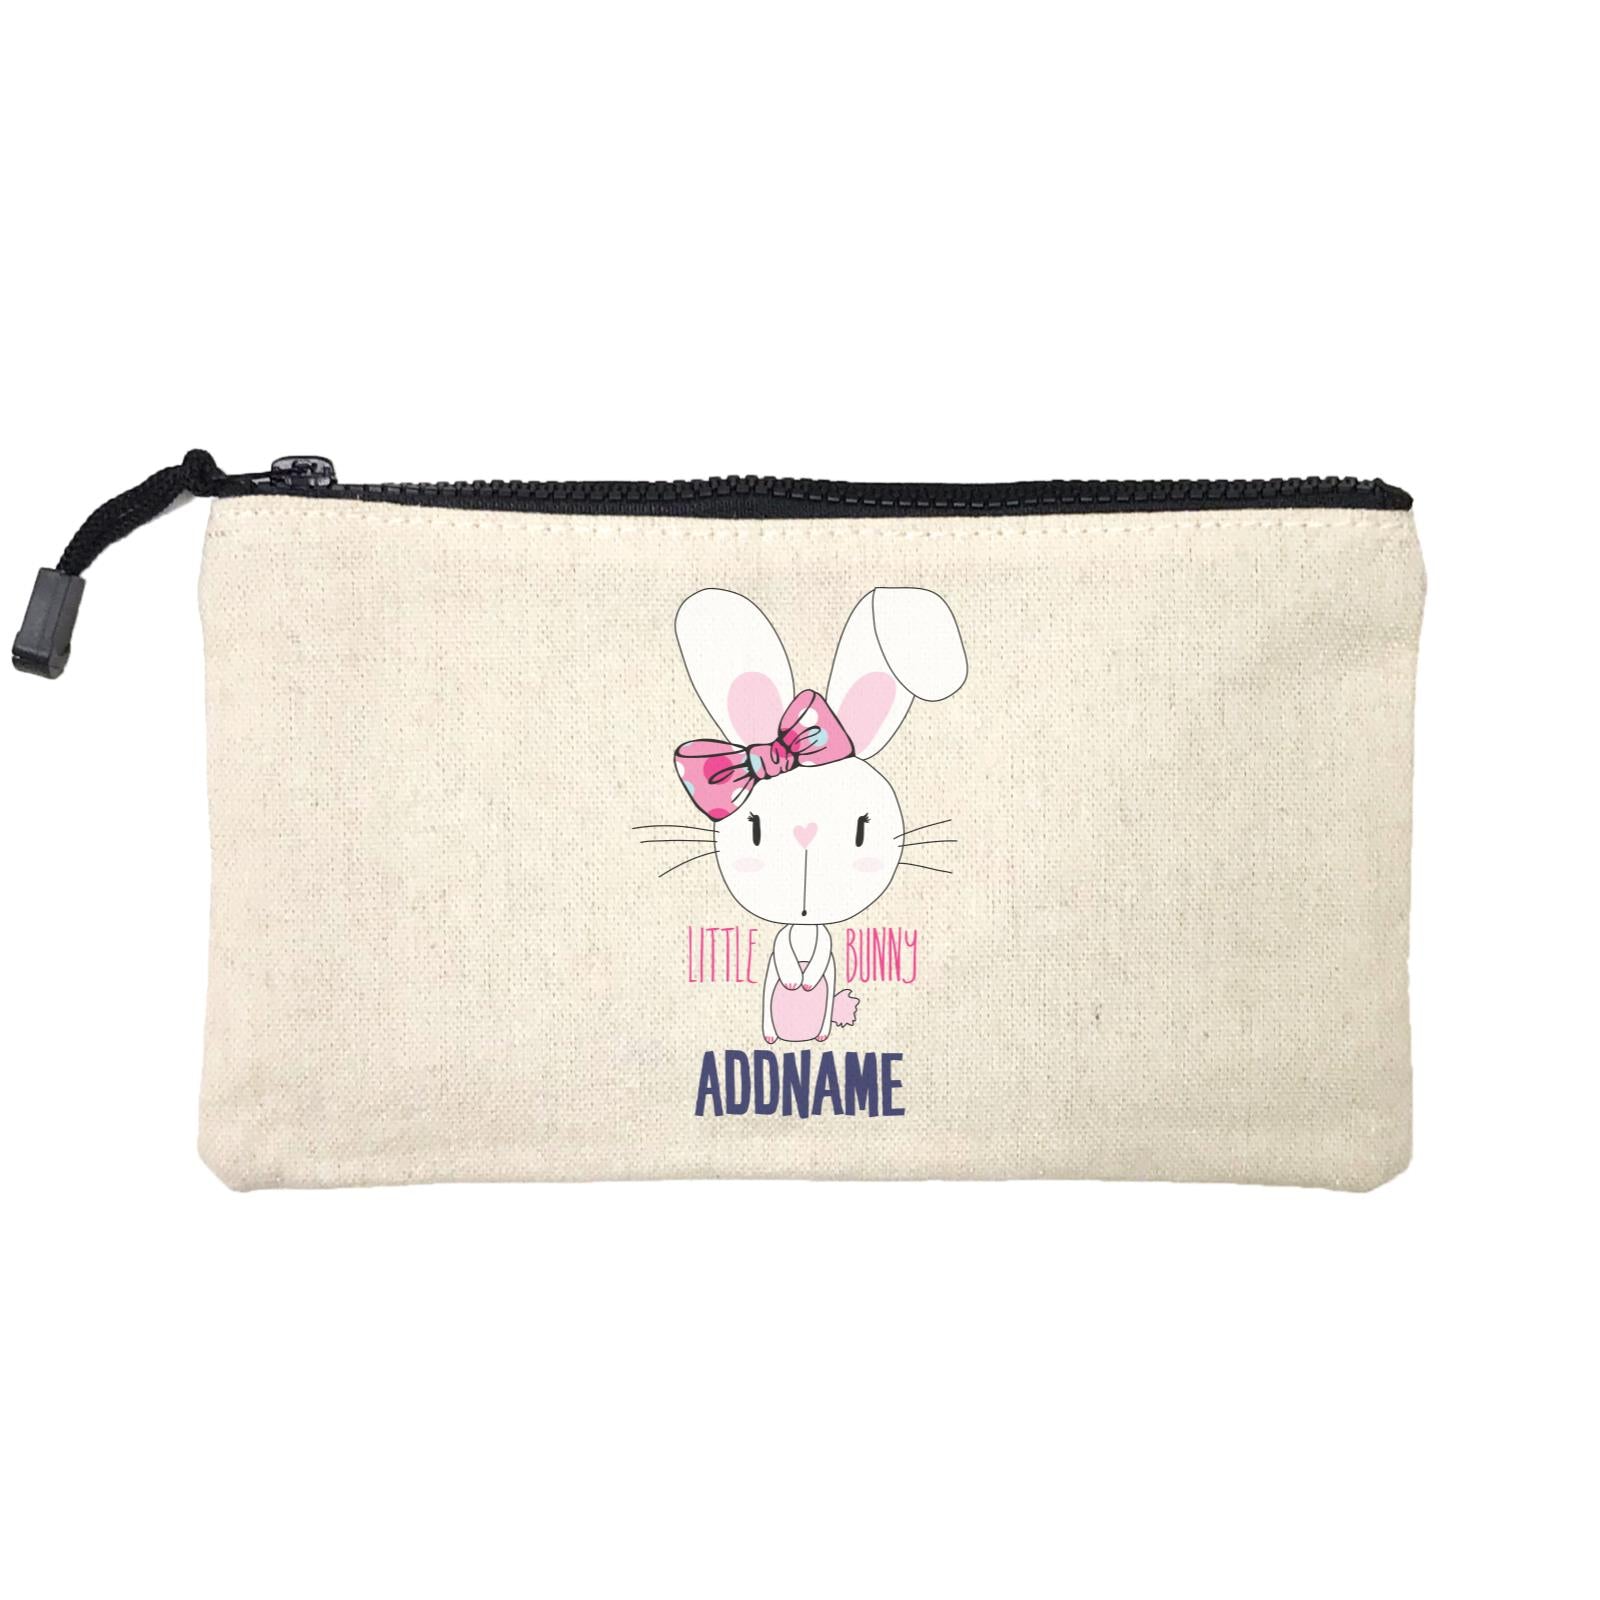 Cool Vibrant Series Little Bunny With Ribbon Addname Mini Accessories Stationery Pouch